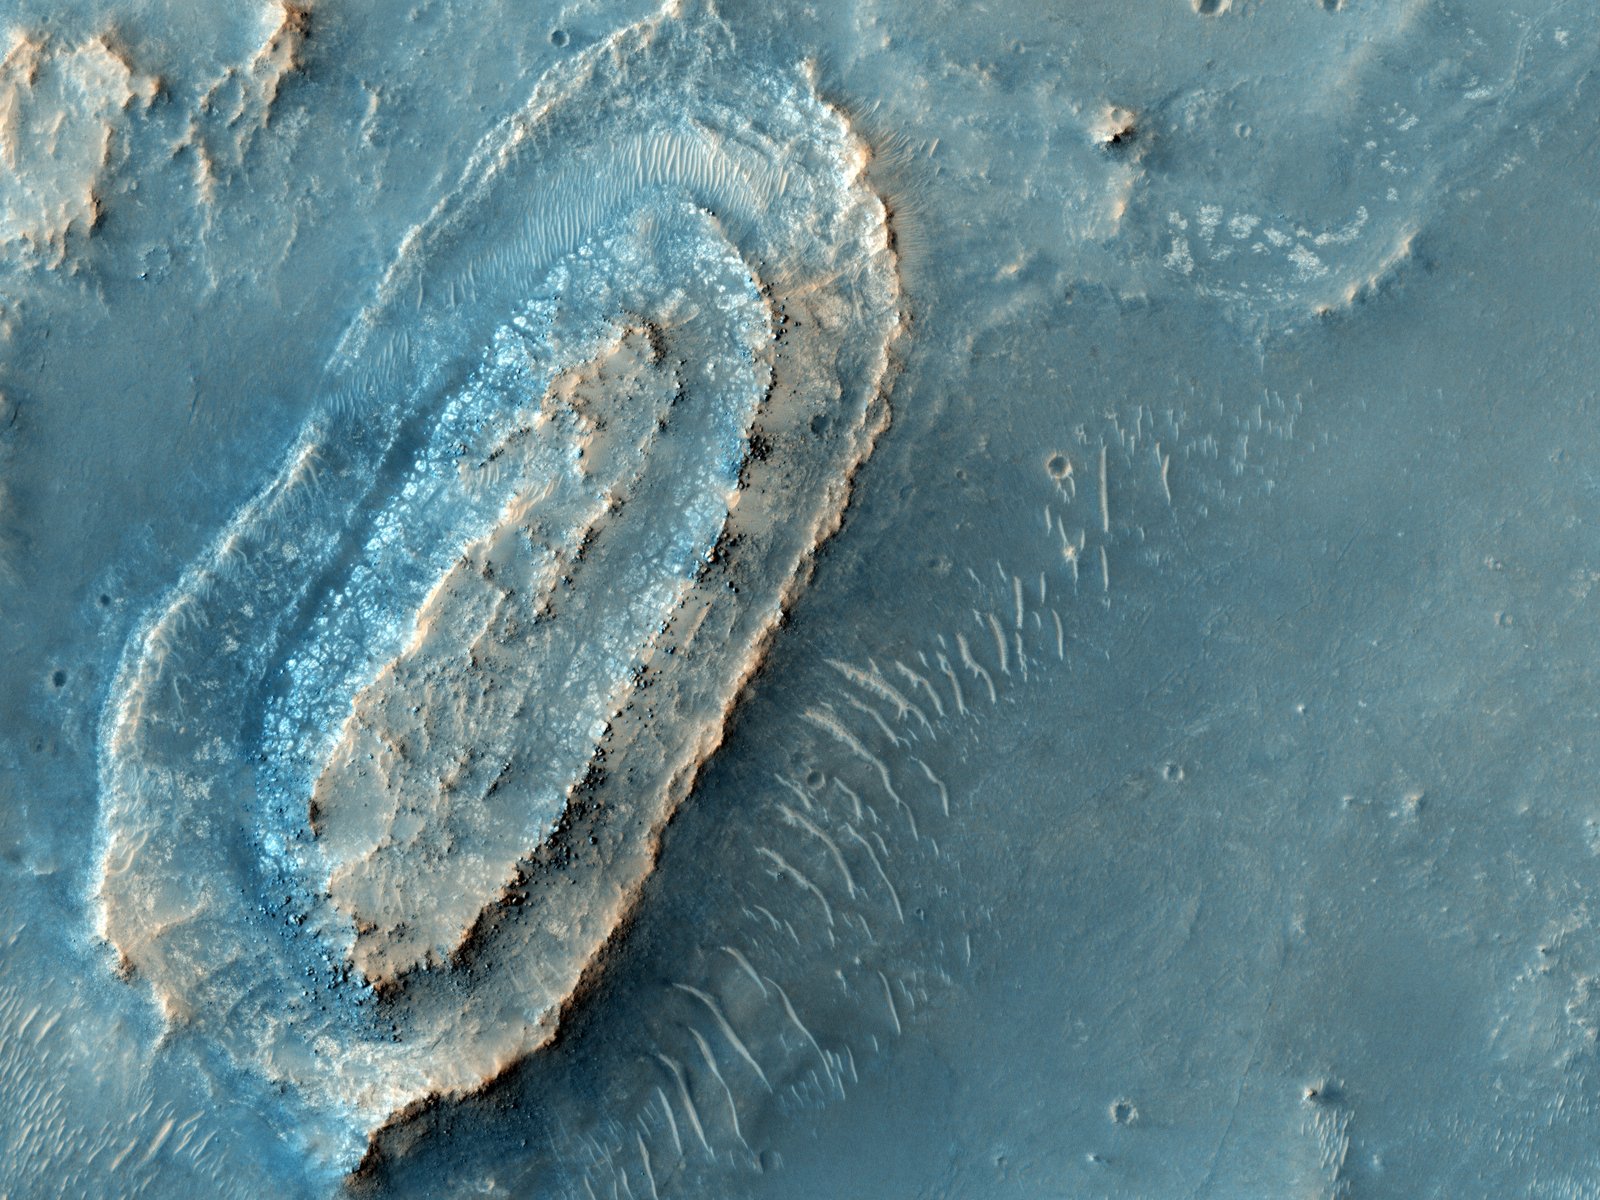 This image lies in the middle of a candidate landing site in the Northeast part of Syrtis Major, a huge shield volcano, and near the Northwest rim of Isidis Planitia, a giant impact basin.